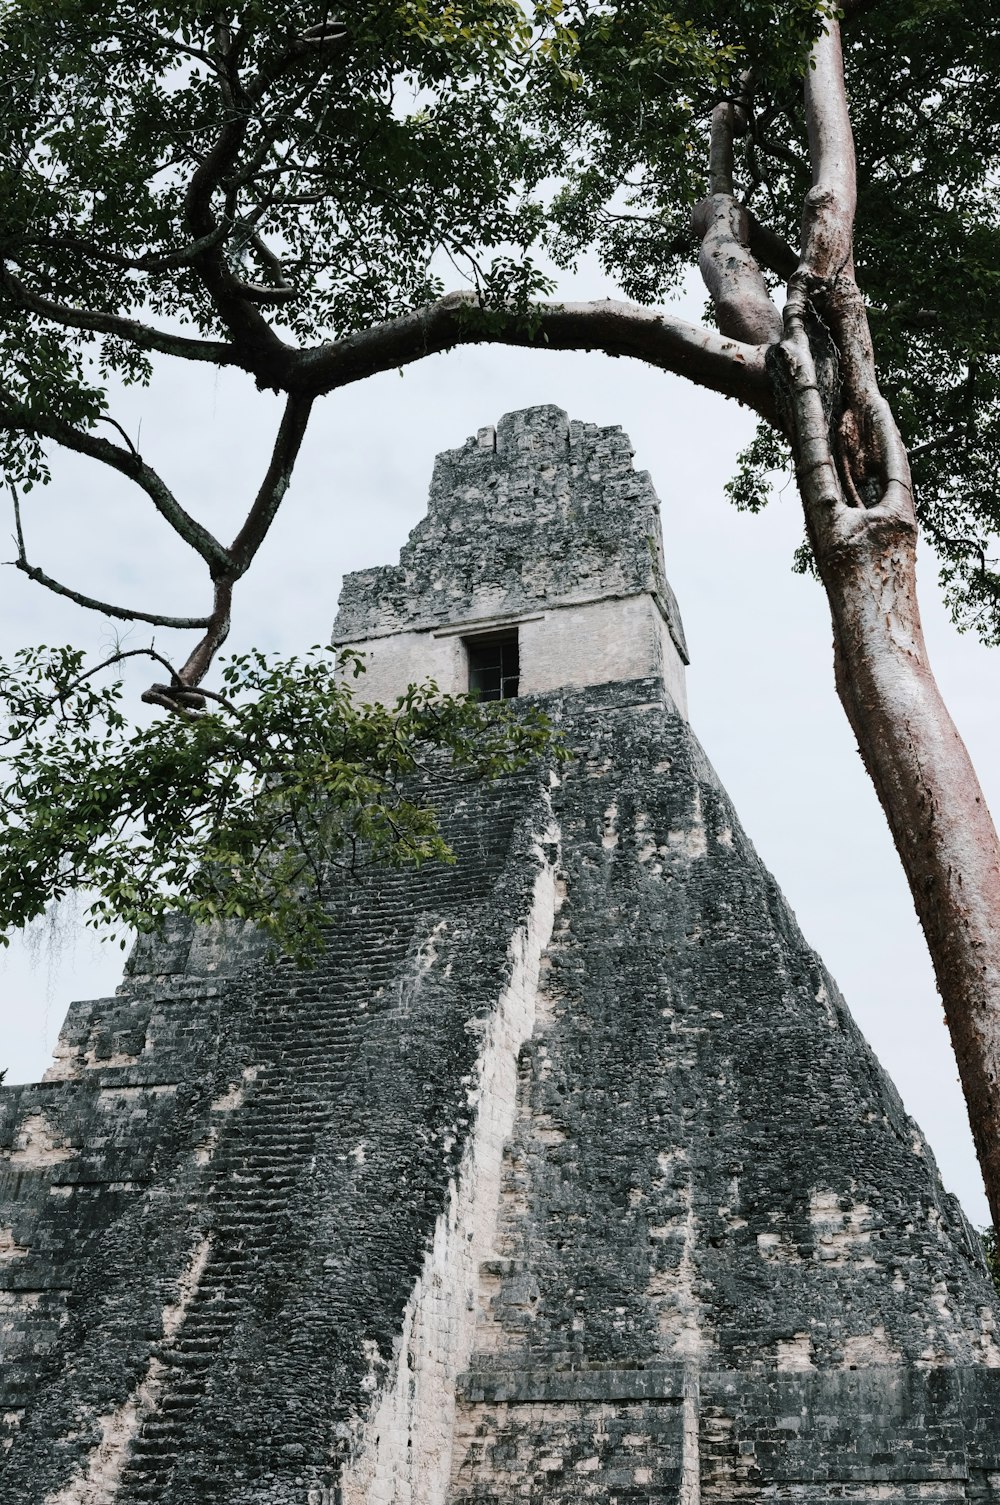 a large pyramid with a tree in front of it